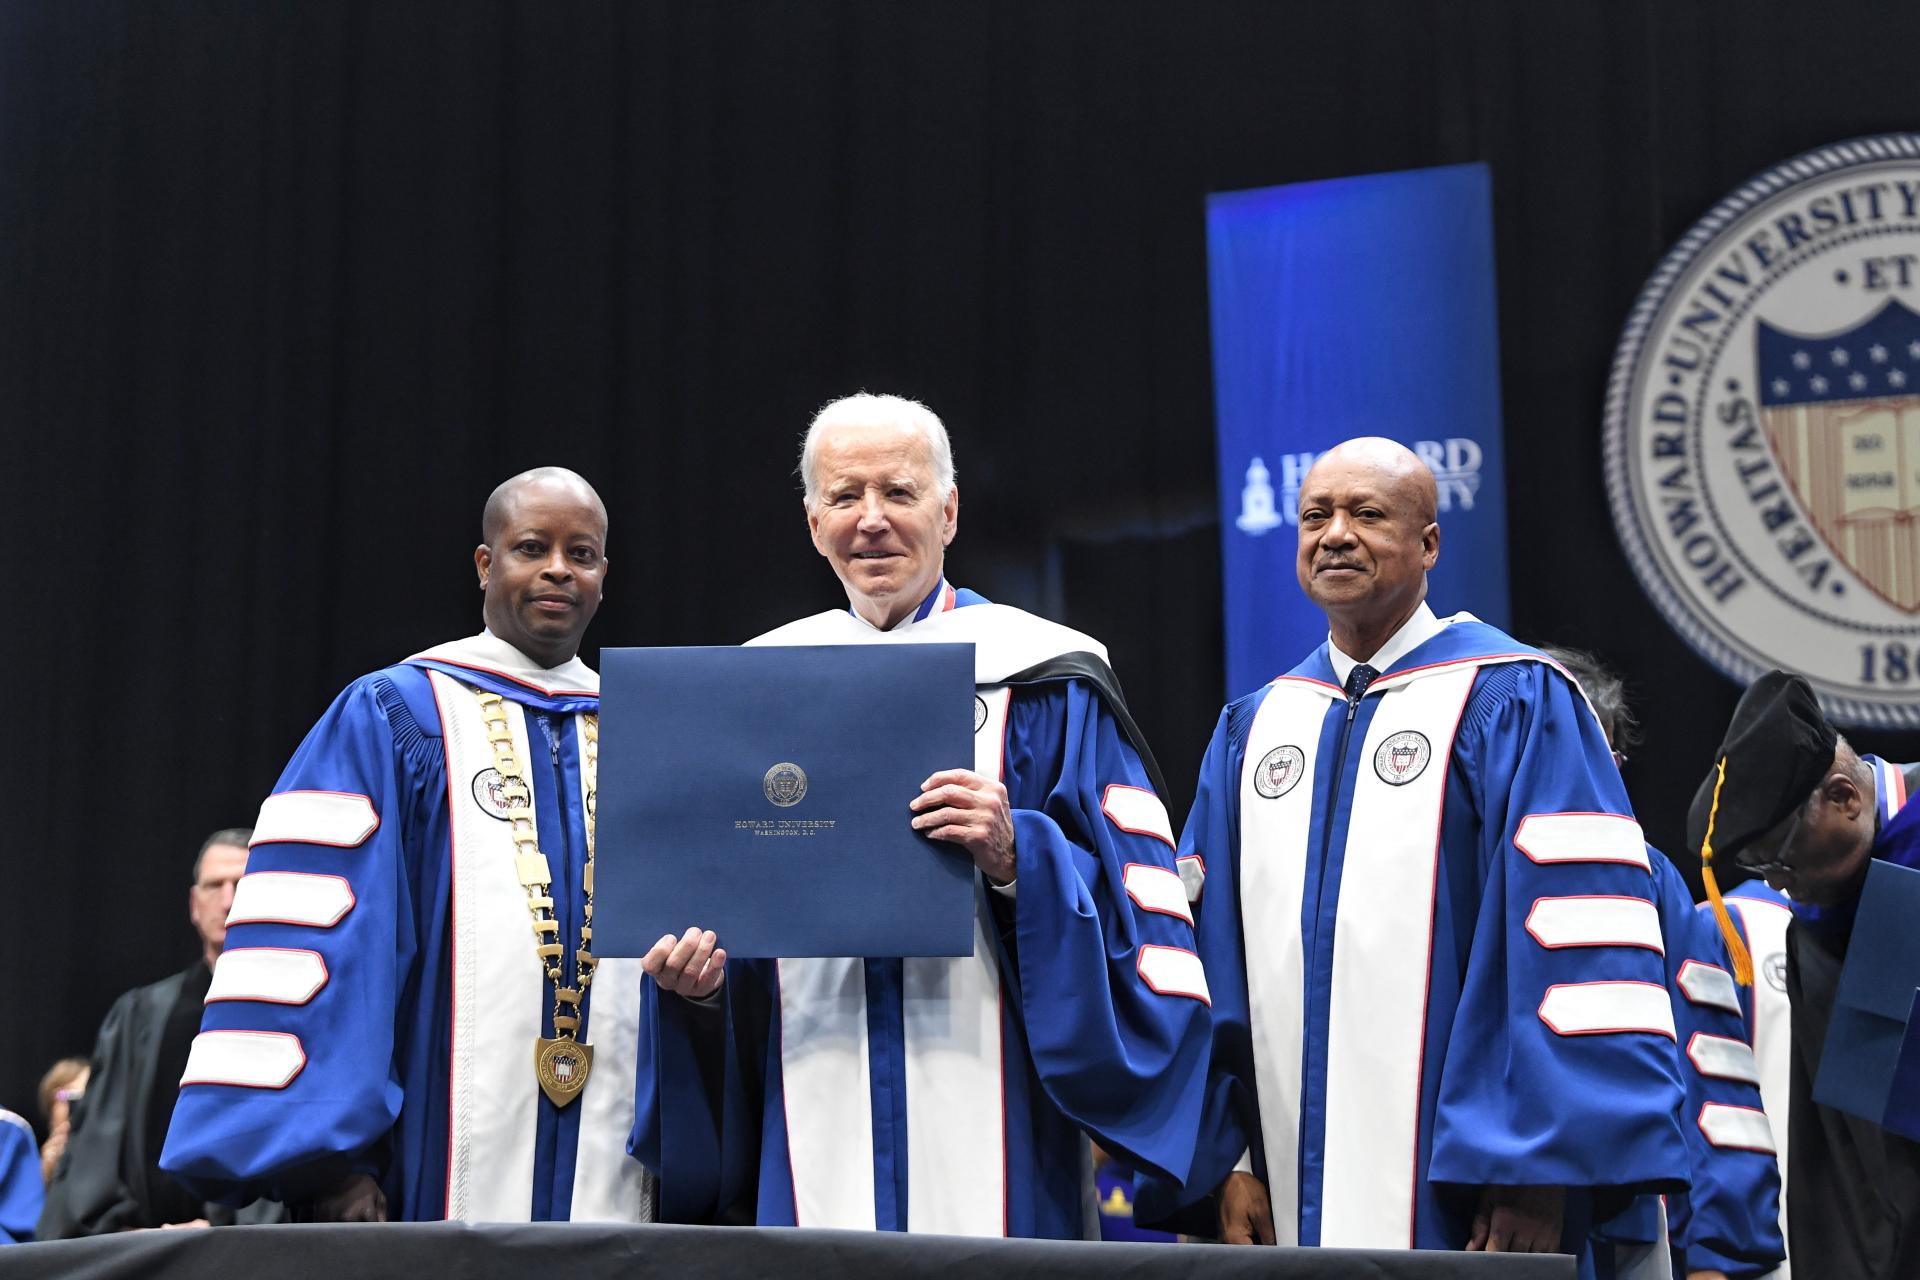 President-Biden-standing-with-Dr.-Frederick-and-Chairman-Morse-received-a-Doctor-of-Humanities-degree-during-Howards-commencement